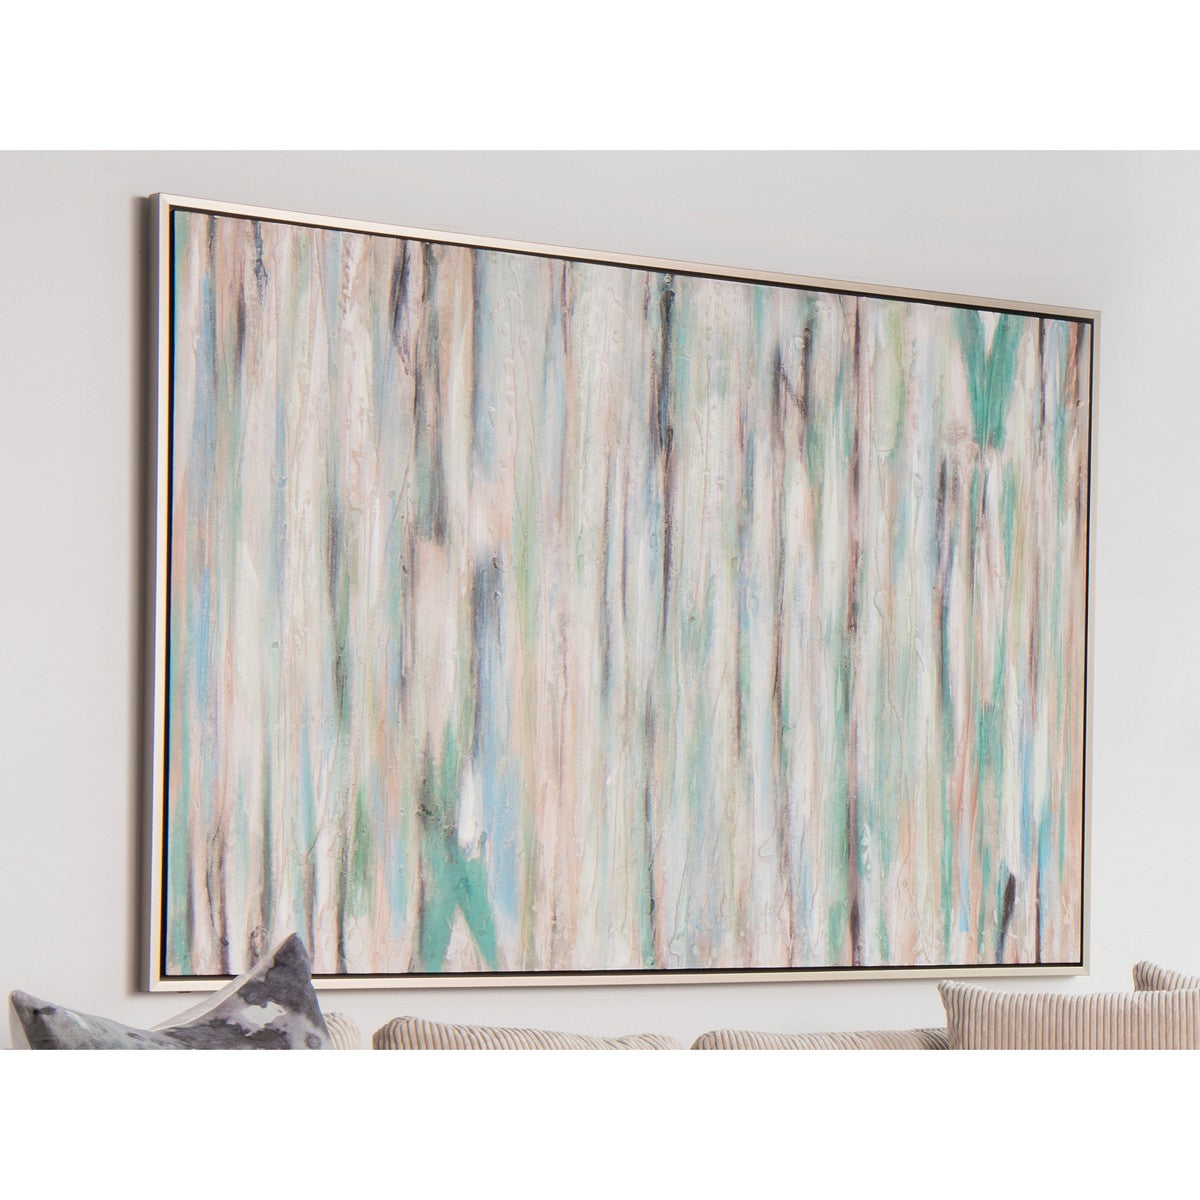 Moe's Home Collection Blue Braid Wall Décor W/Frame - FX-1148-37 - Moe's Home Collection - Art - Minimal And Modern - 1